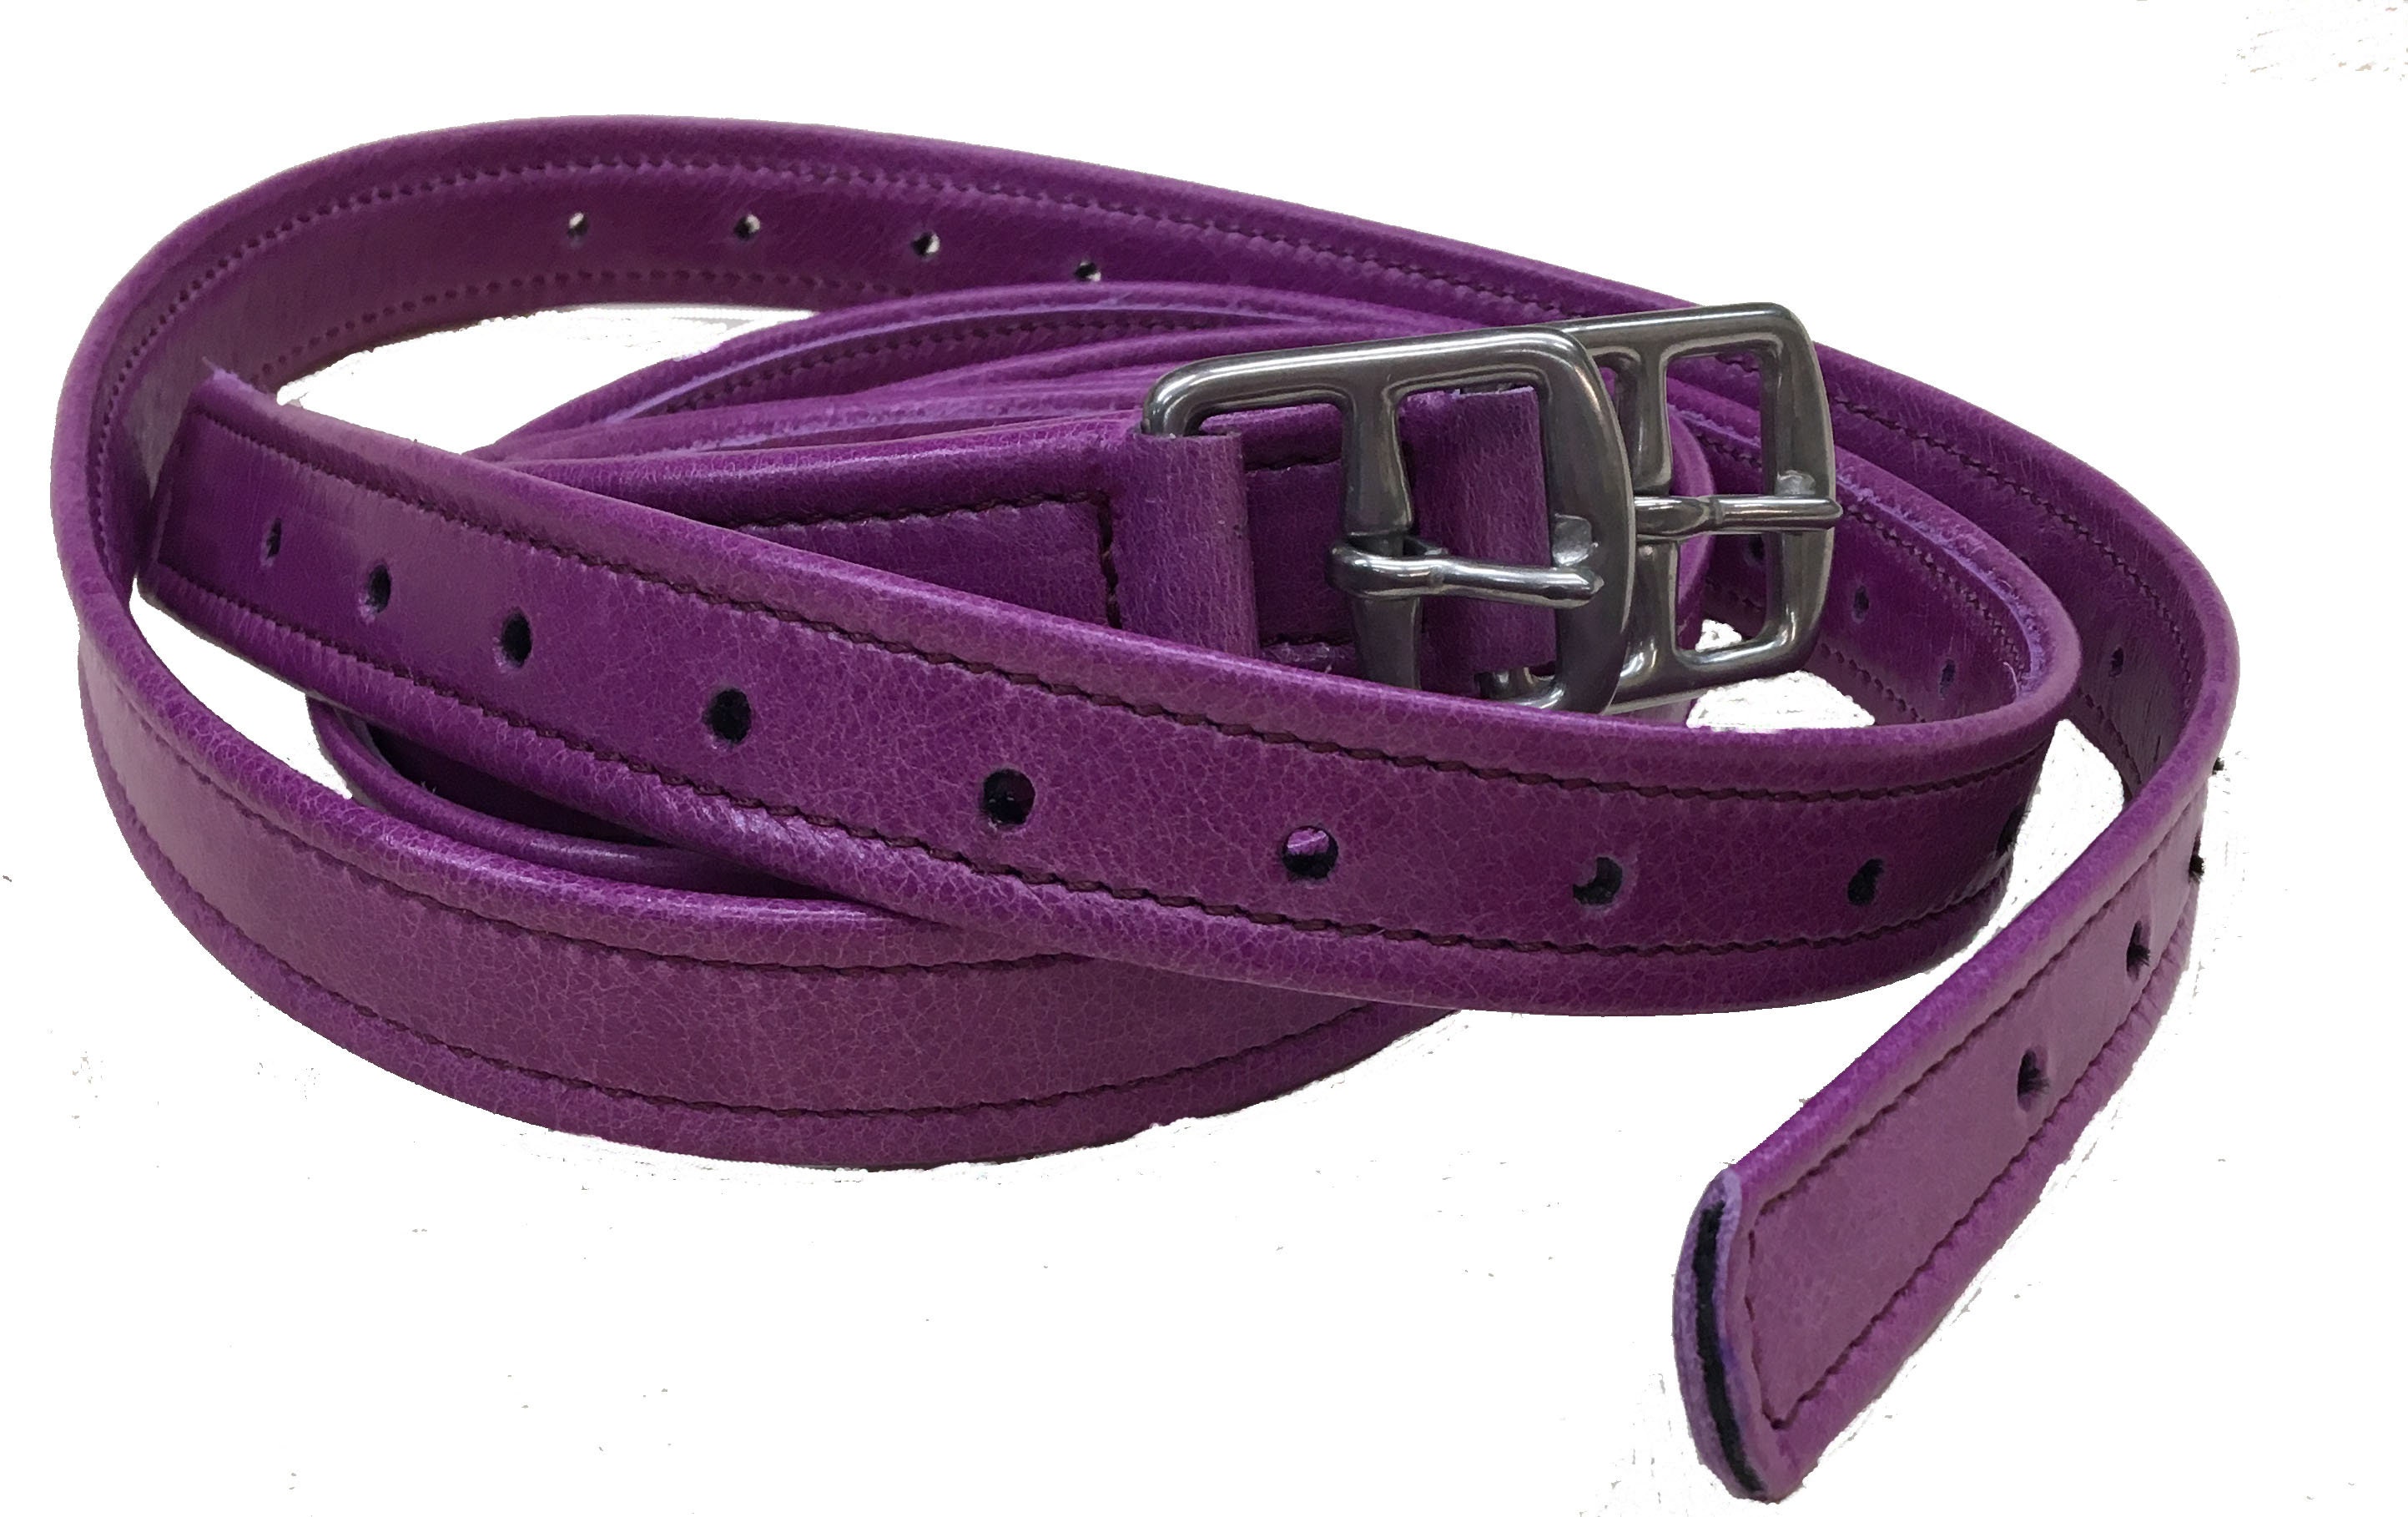 Purple Horse Stirrup Leathers Handmade in the UK Real Leather - Etsy